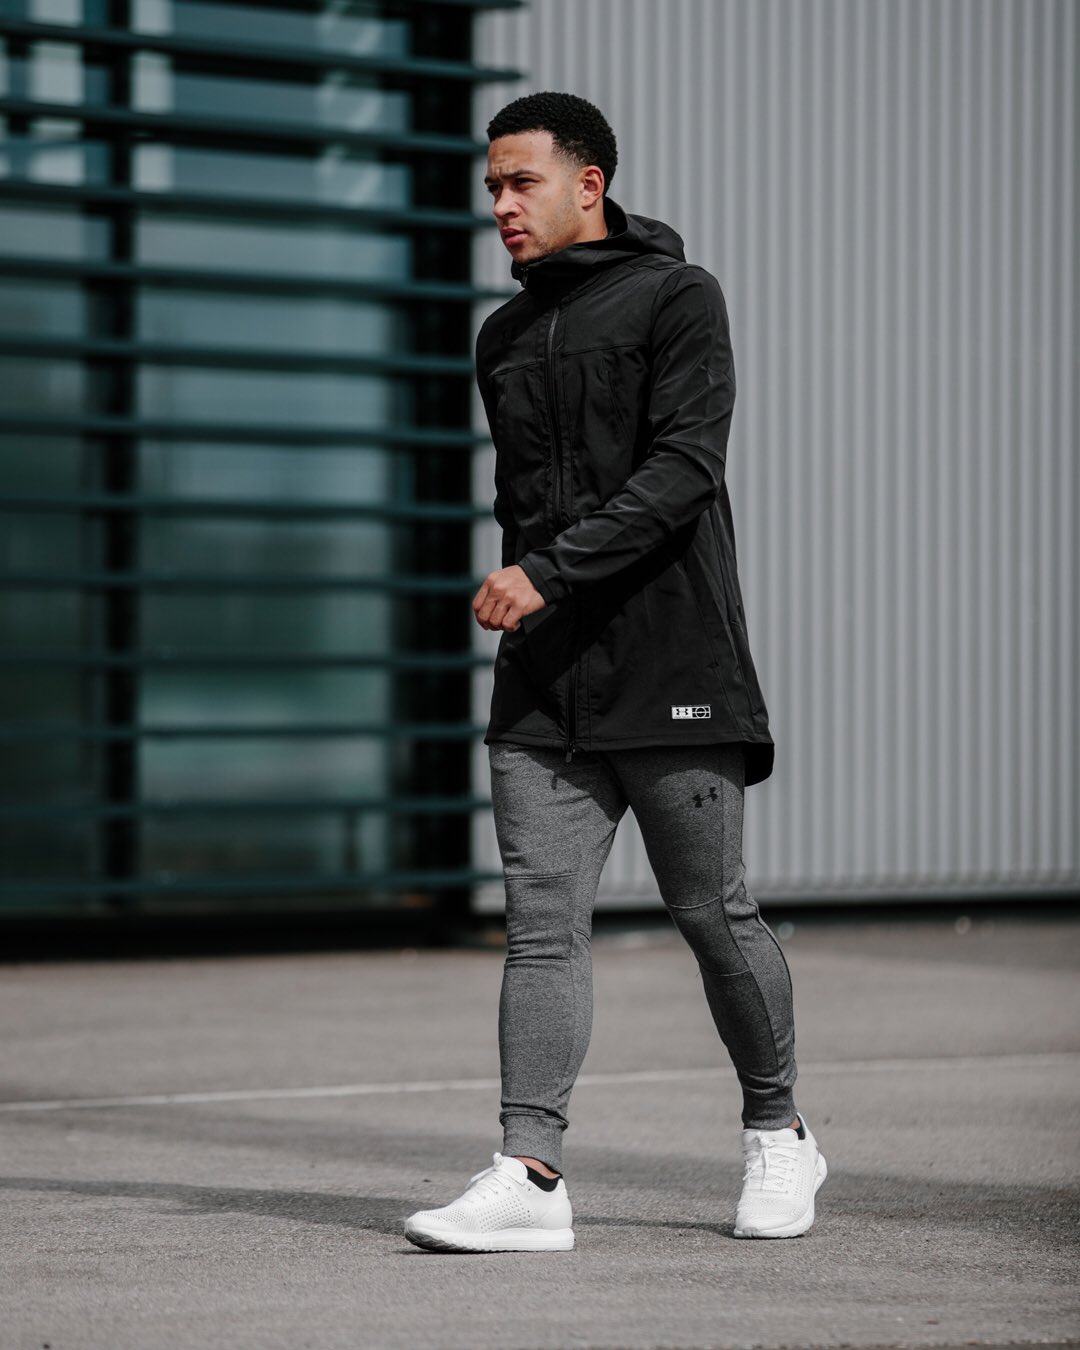 Memphis Depay on Twitter: be in on Tuesday next week and want to meet you guys at the new @UnderArmourNL store at Kalverstraat. #UAHOVR #WEWILL https://t.co/k3XjtqLXqO" / Twitter